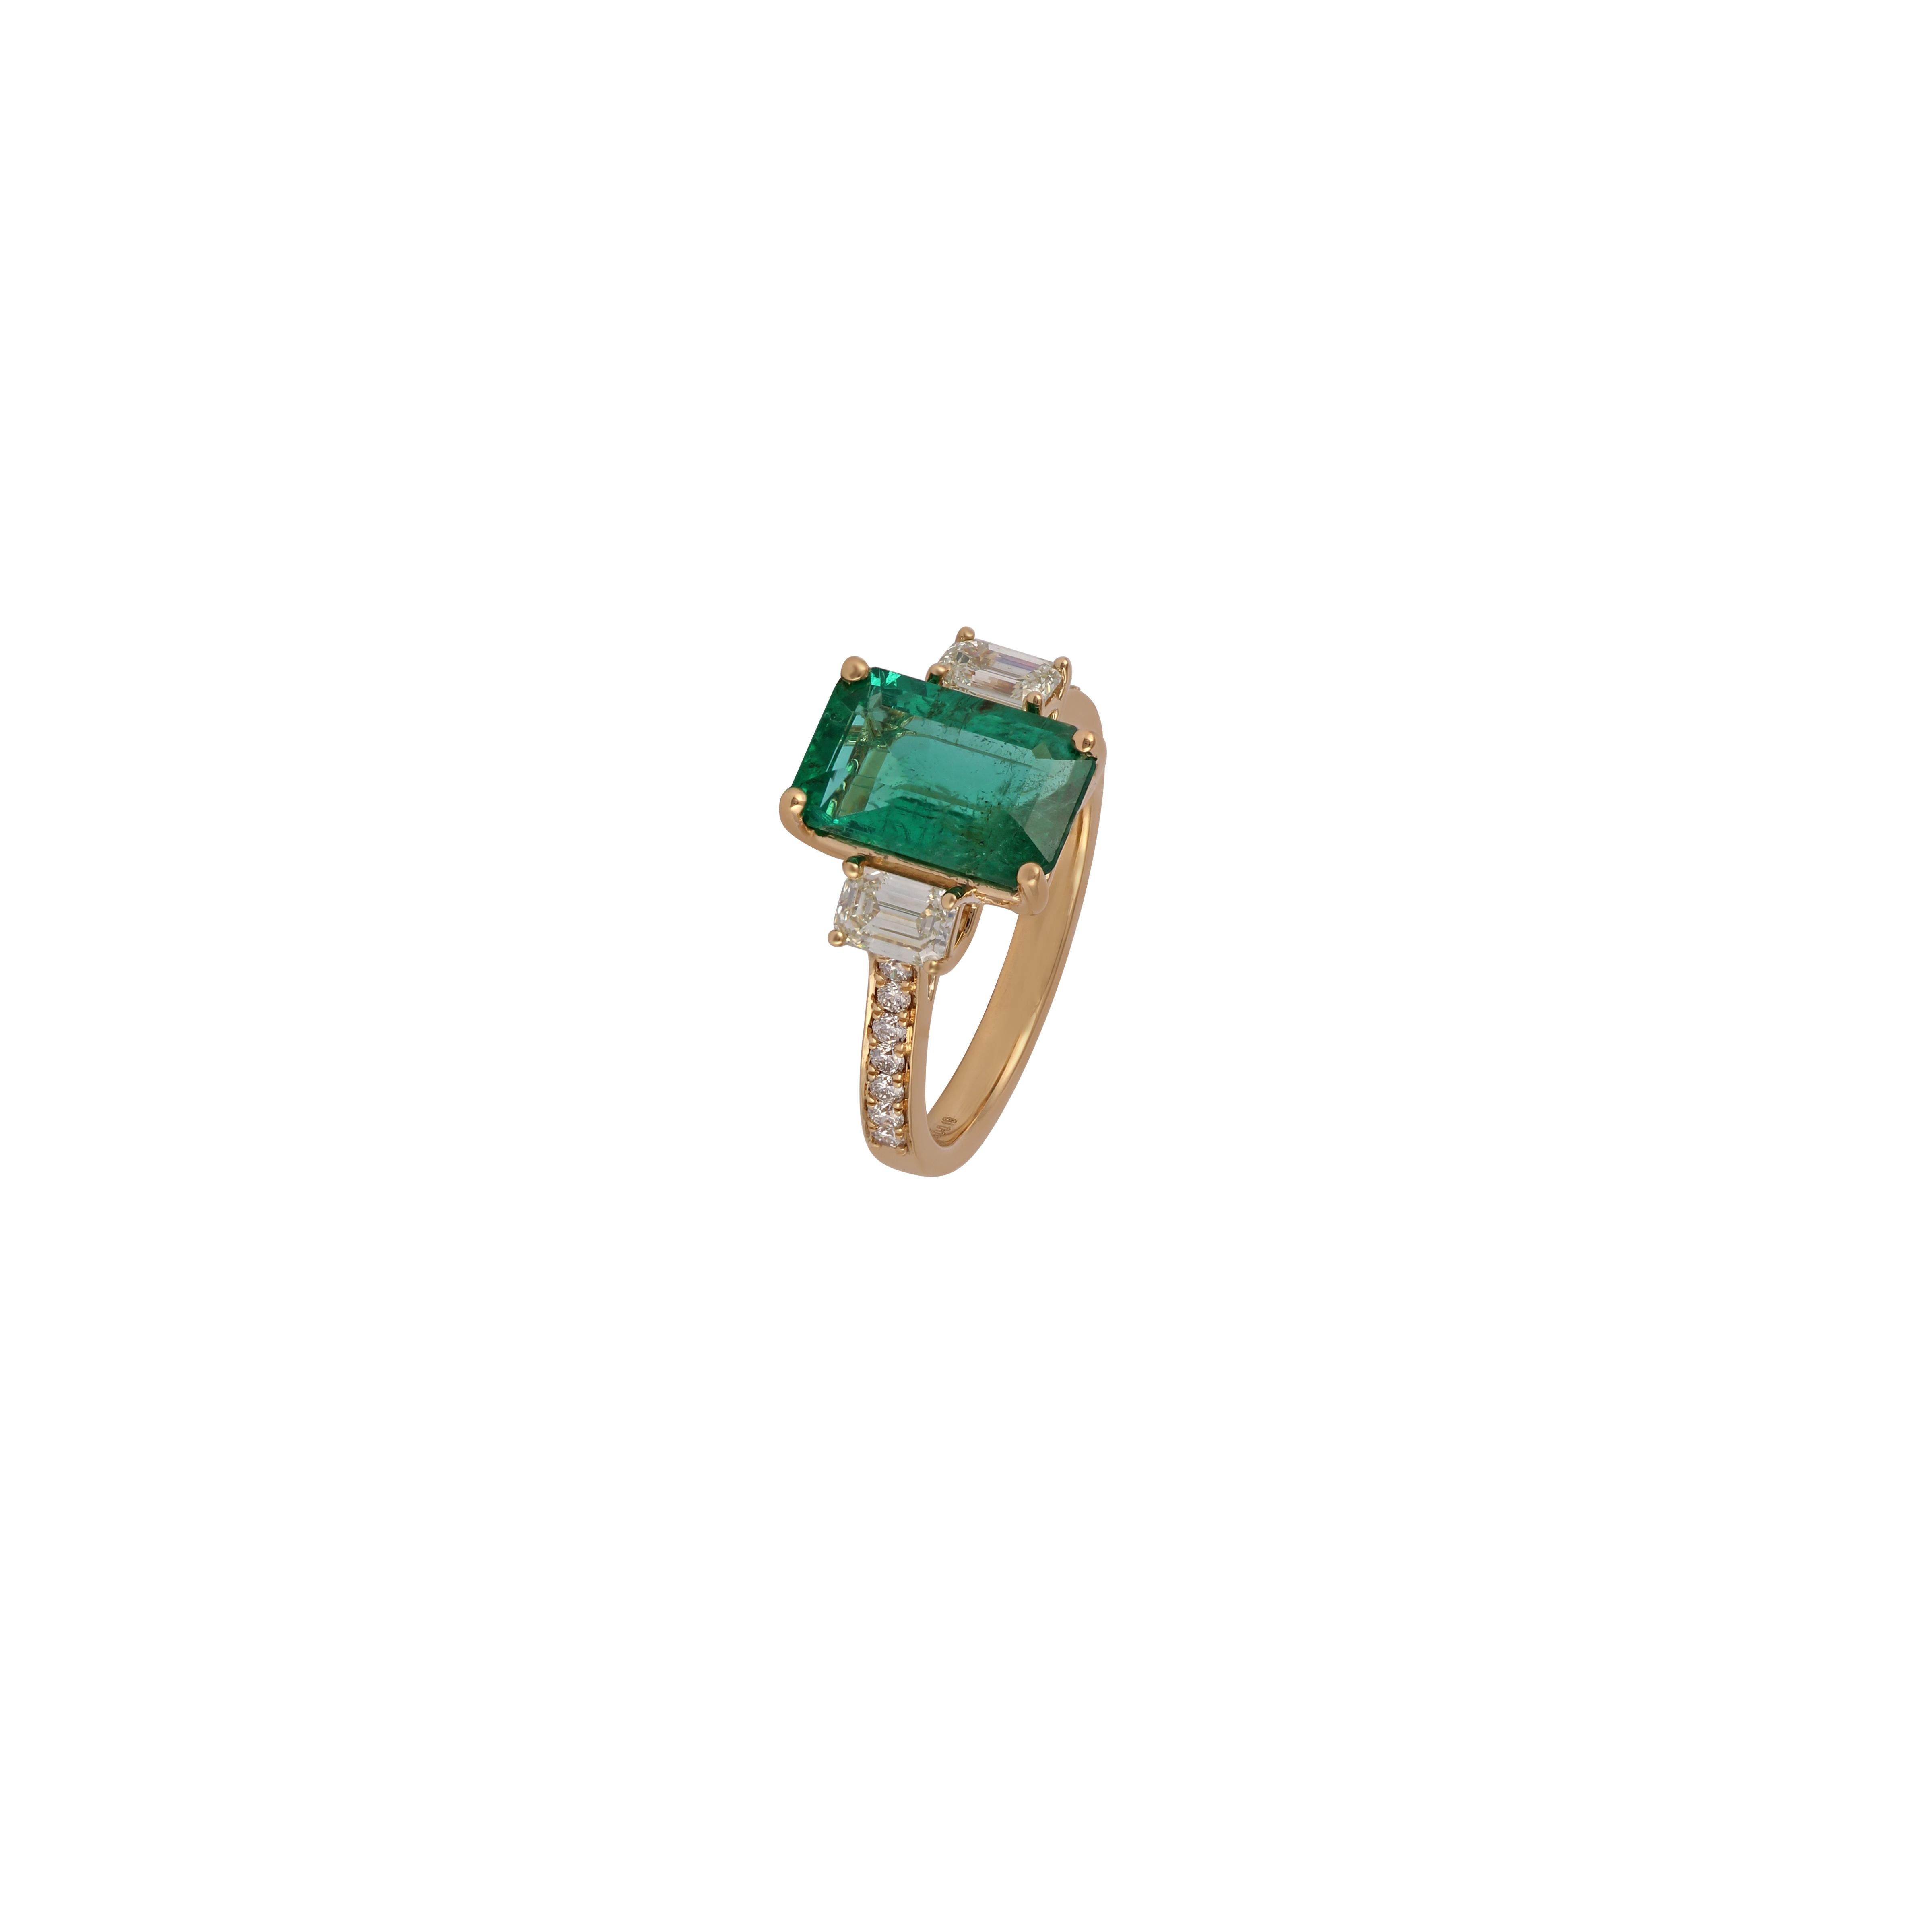 Octagon Cut 2.85 Carat Zambian Emerald & Diamond Ring Studded in 18k Yellow Gold For Sale